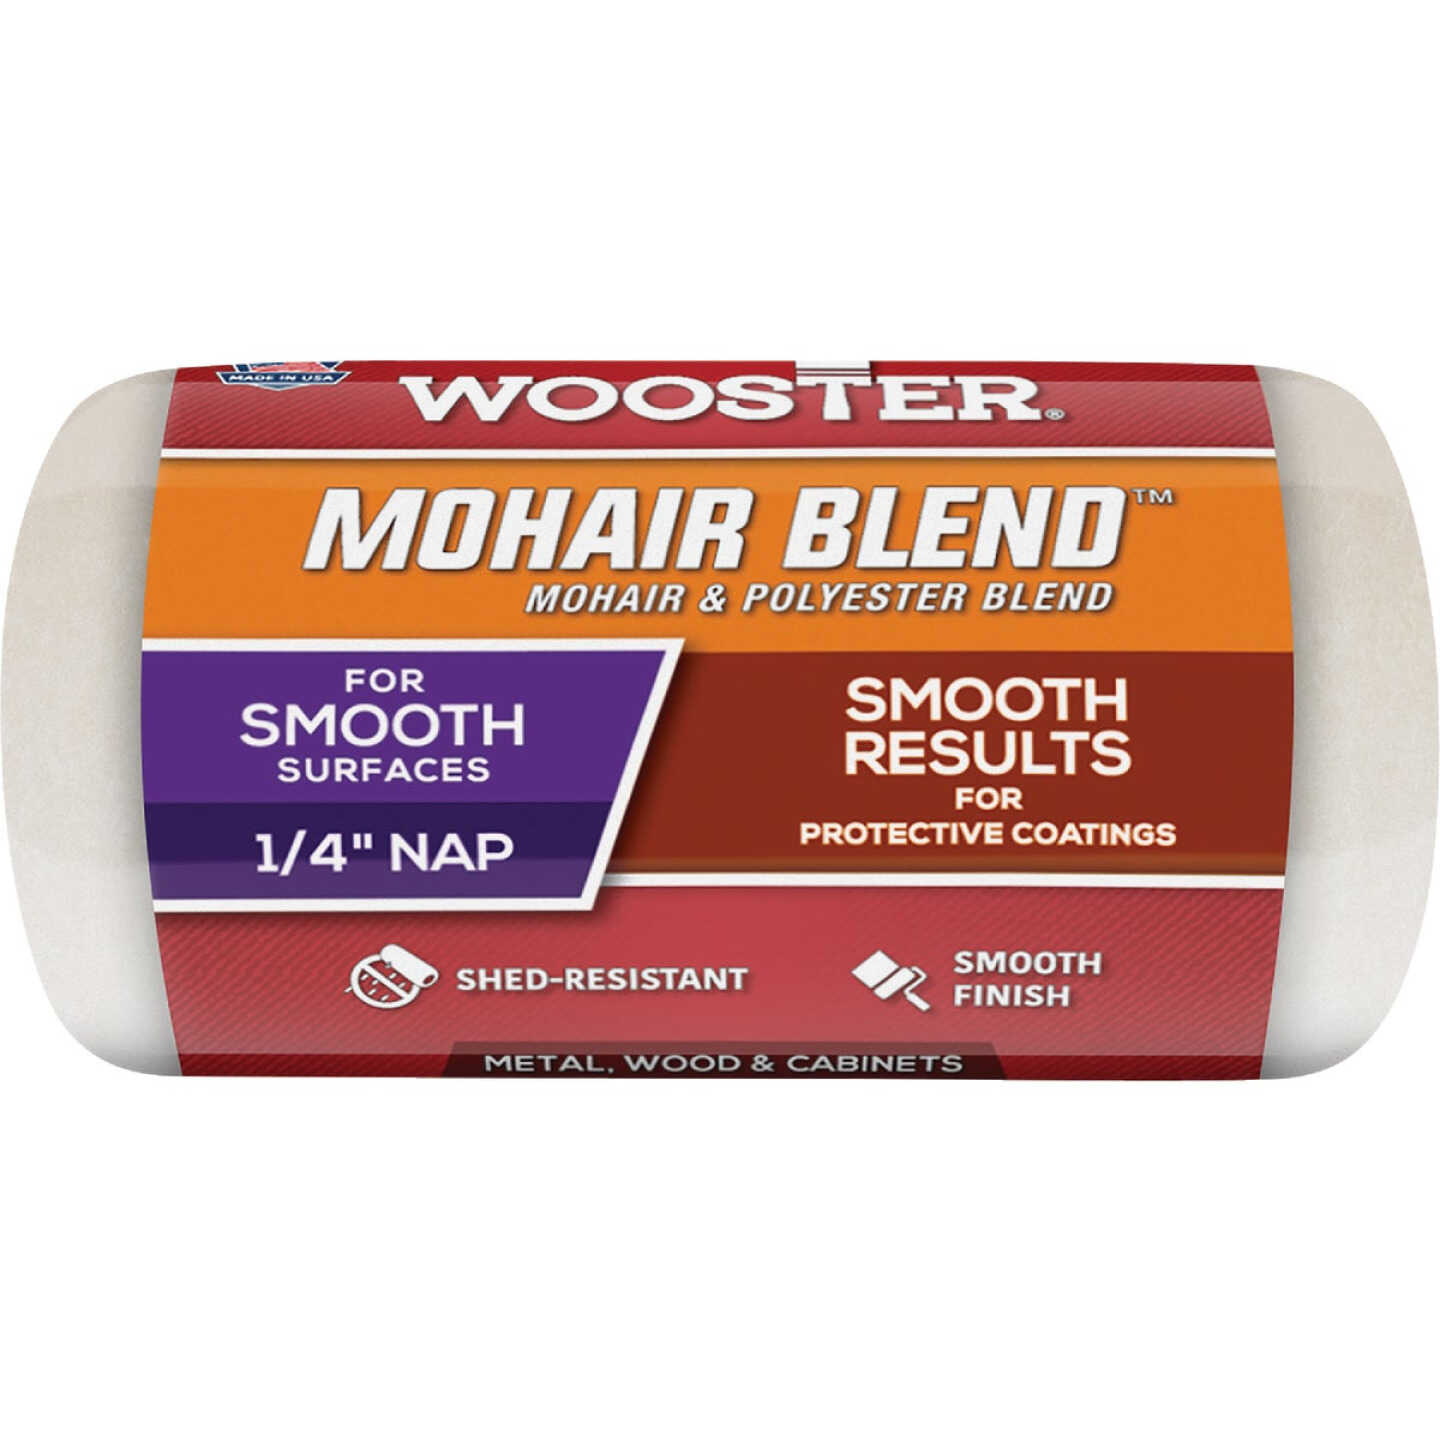 Wooster Mohair Blend 4 In. x 1/4 In. Woven Fabric Roller Cover Image 1